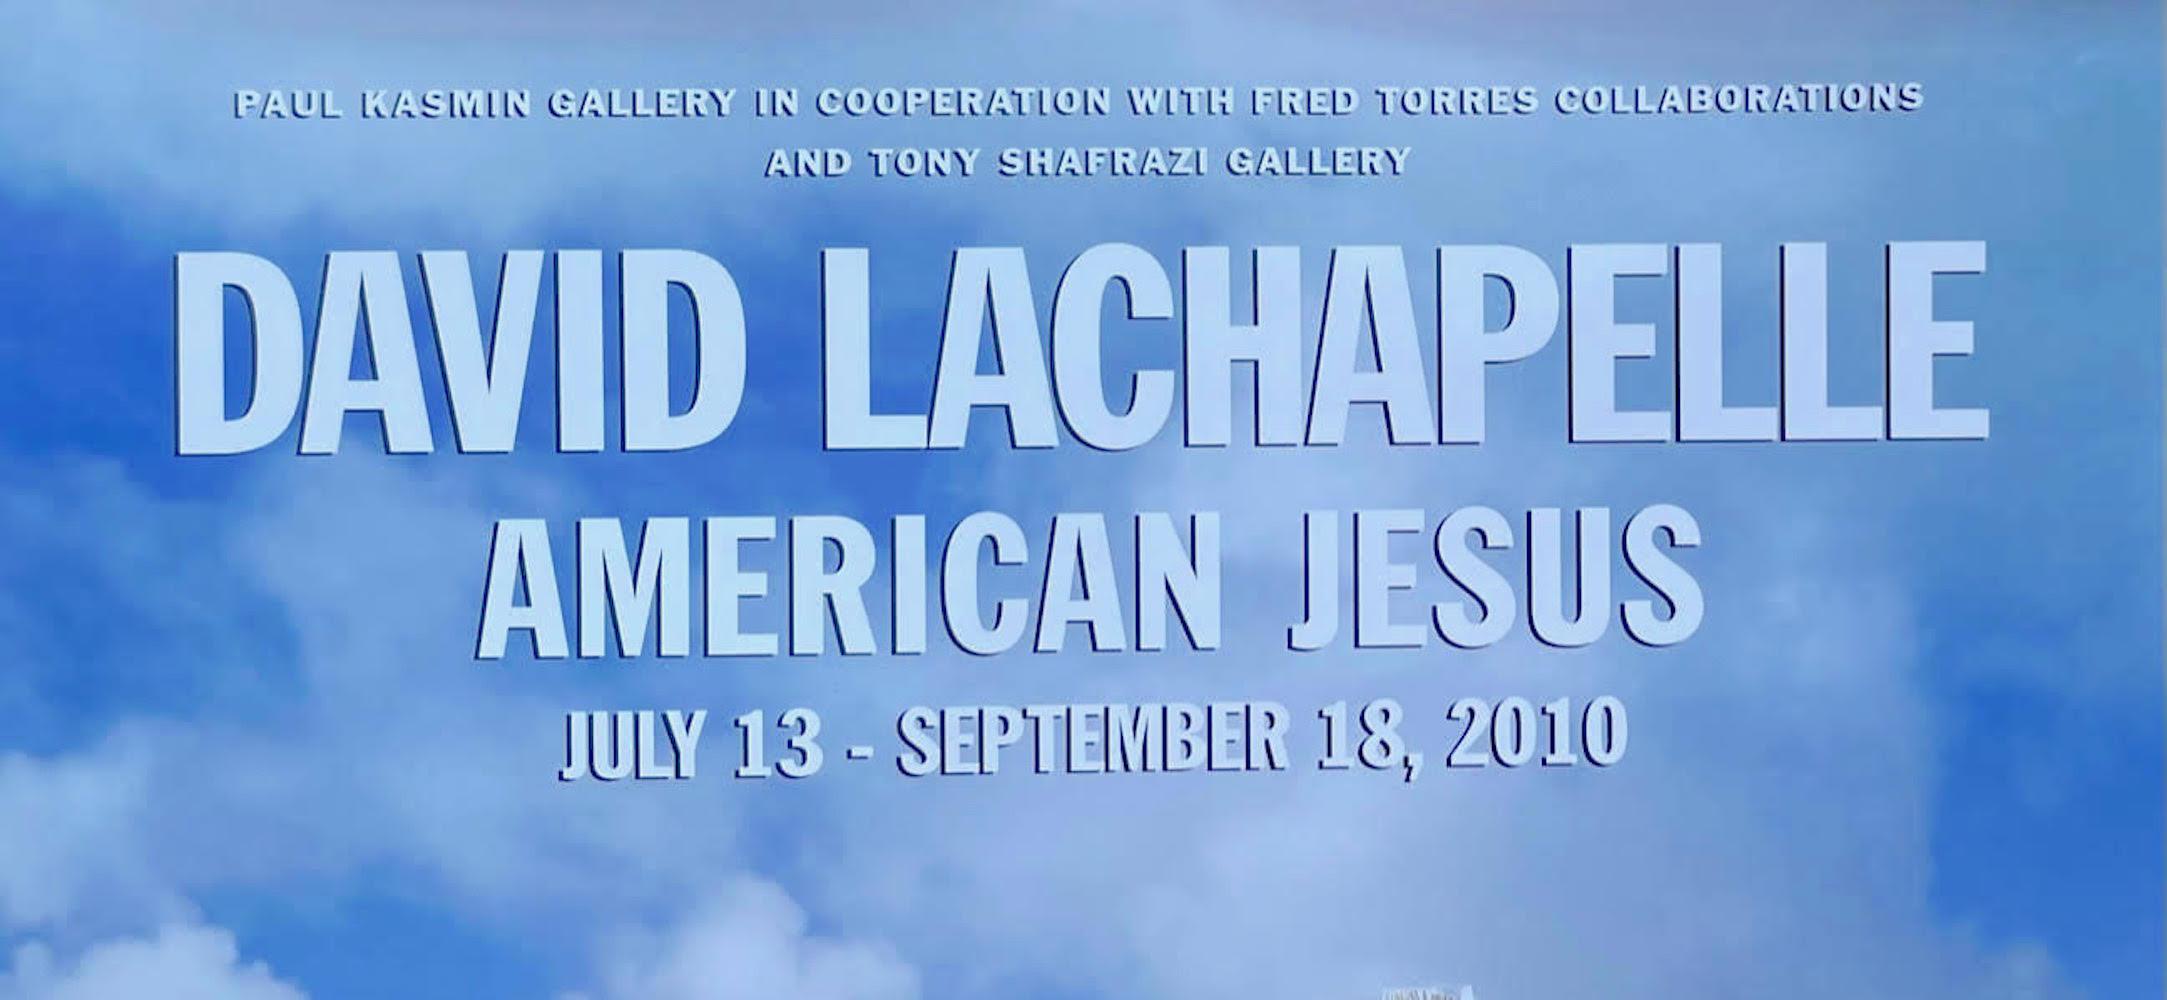 David LaChapelle American Jesus poster (Hand Signed by David LaChapelle) For Sale 3